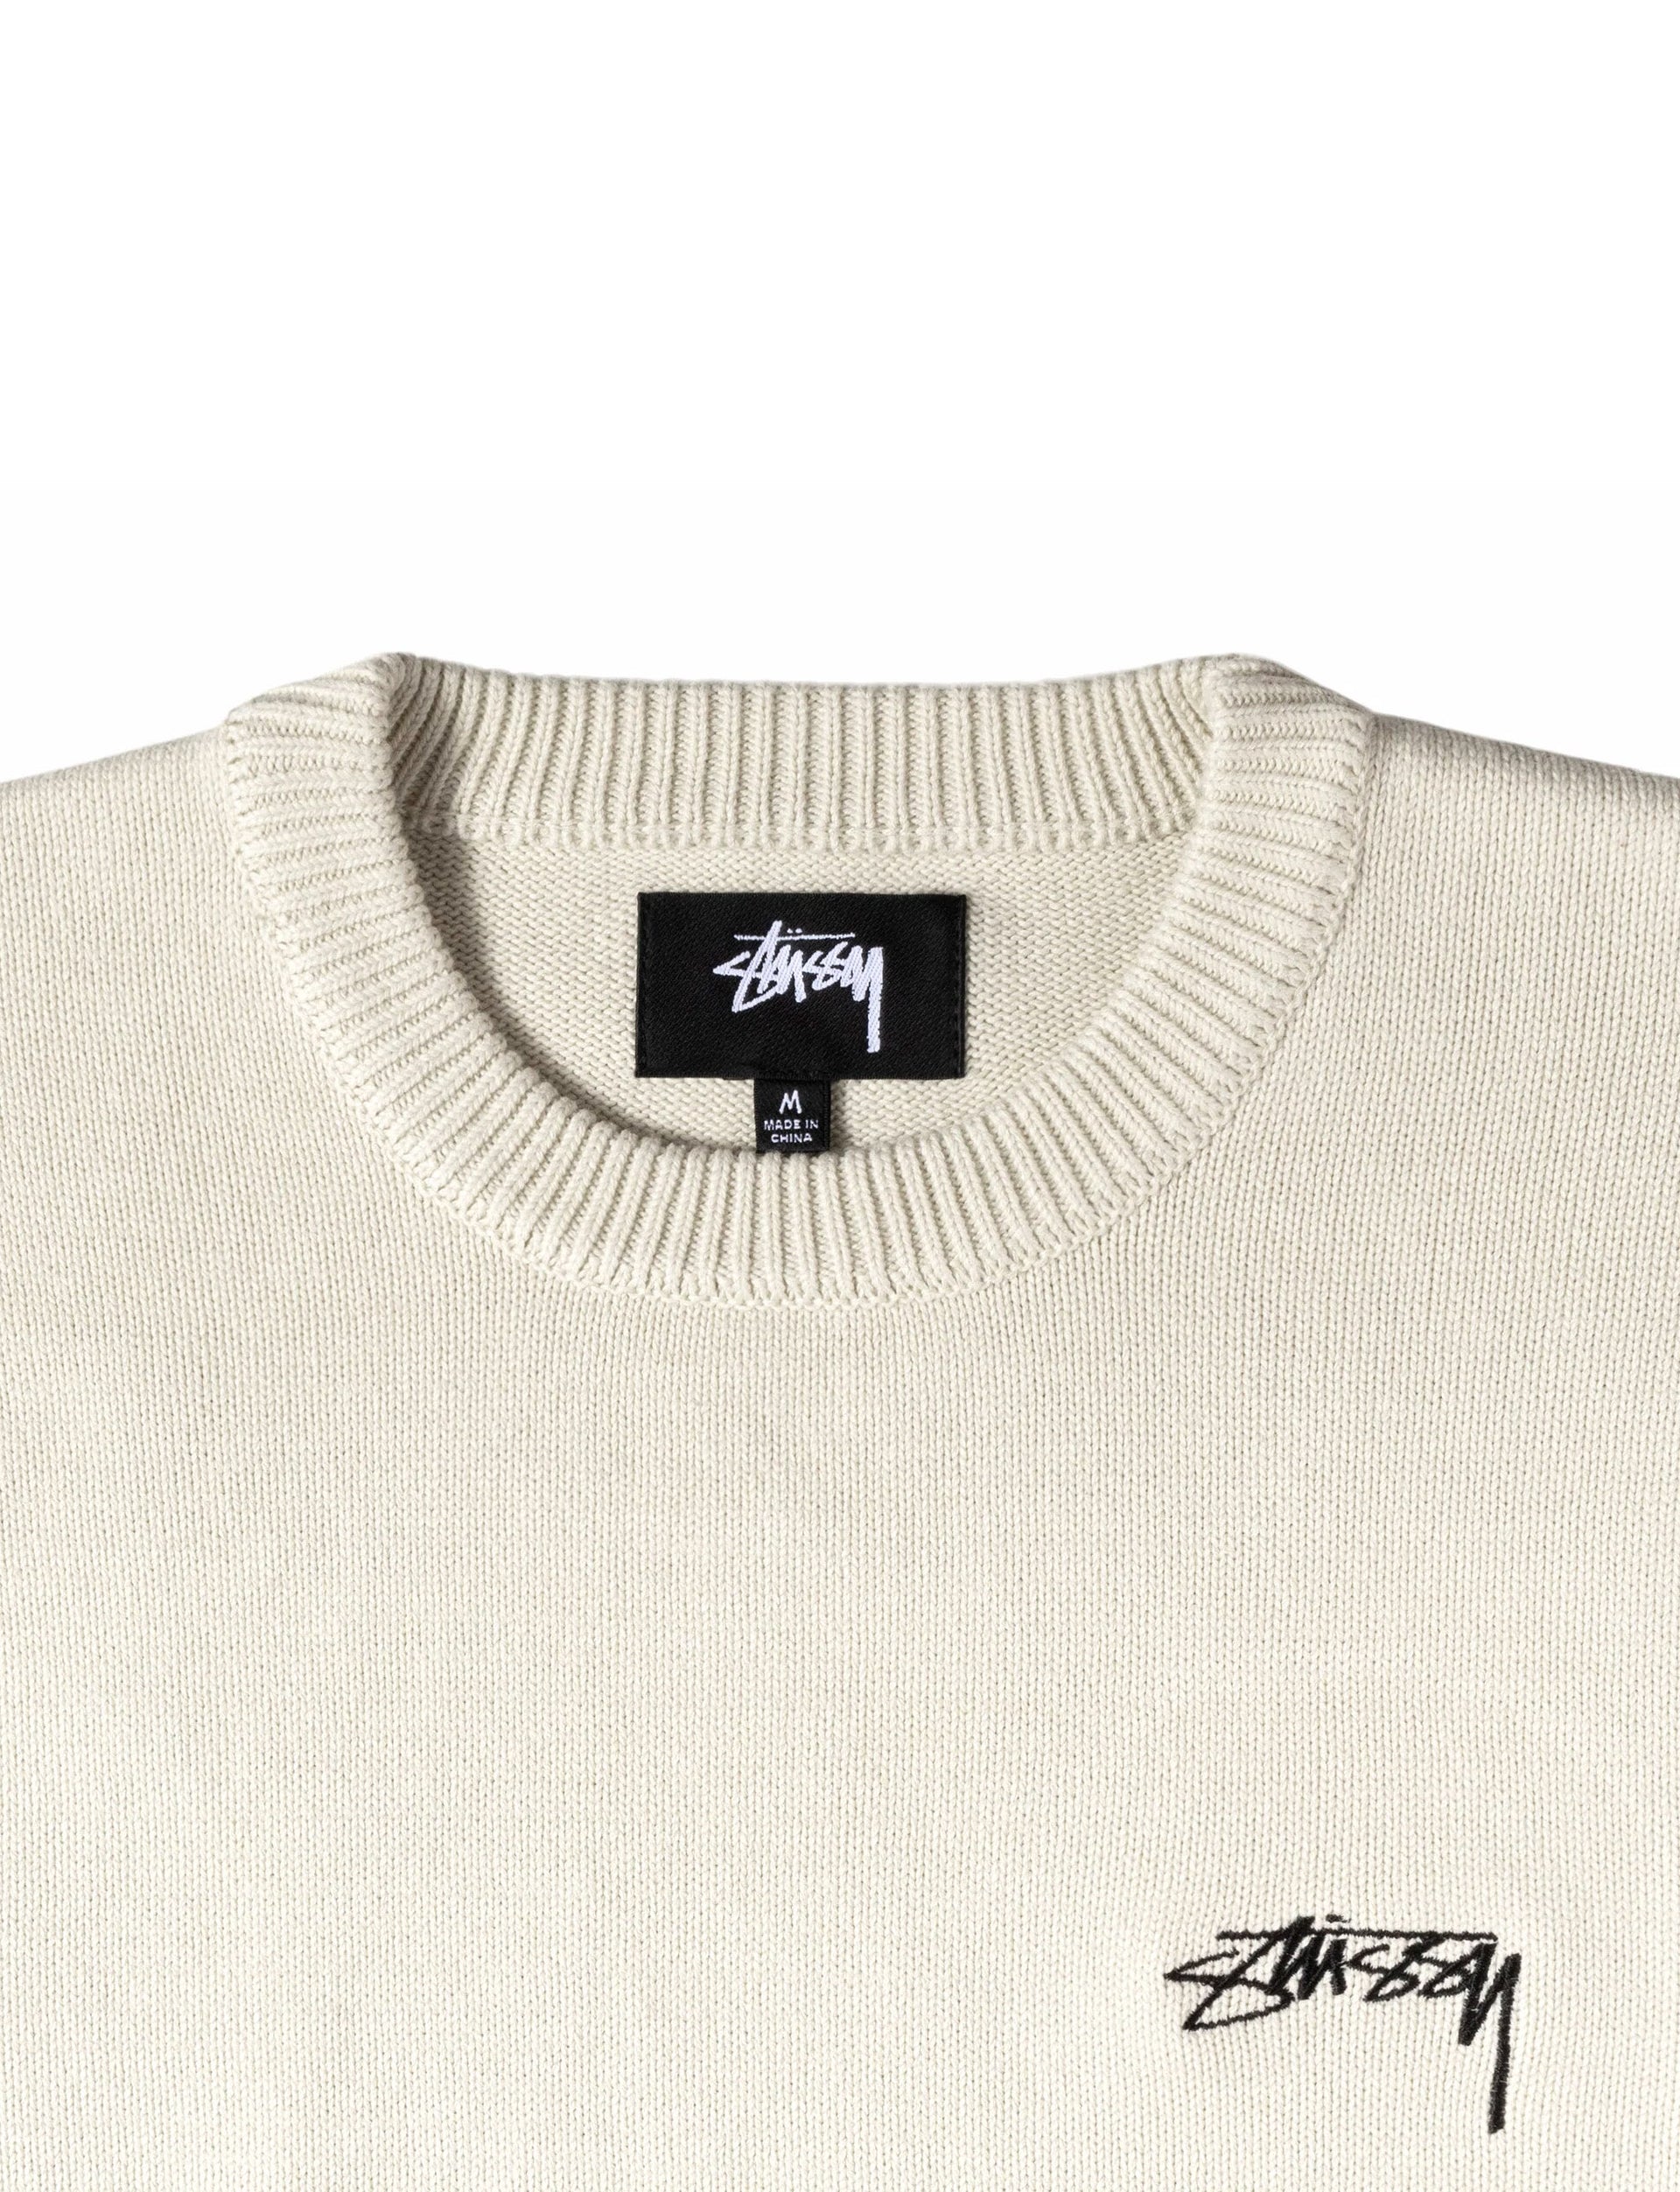 STÜSSY CARE LABEL SWEATER NATURAL